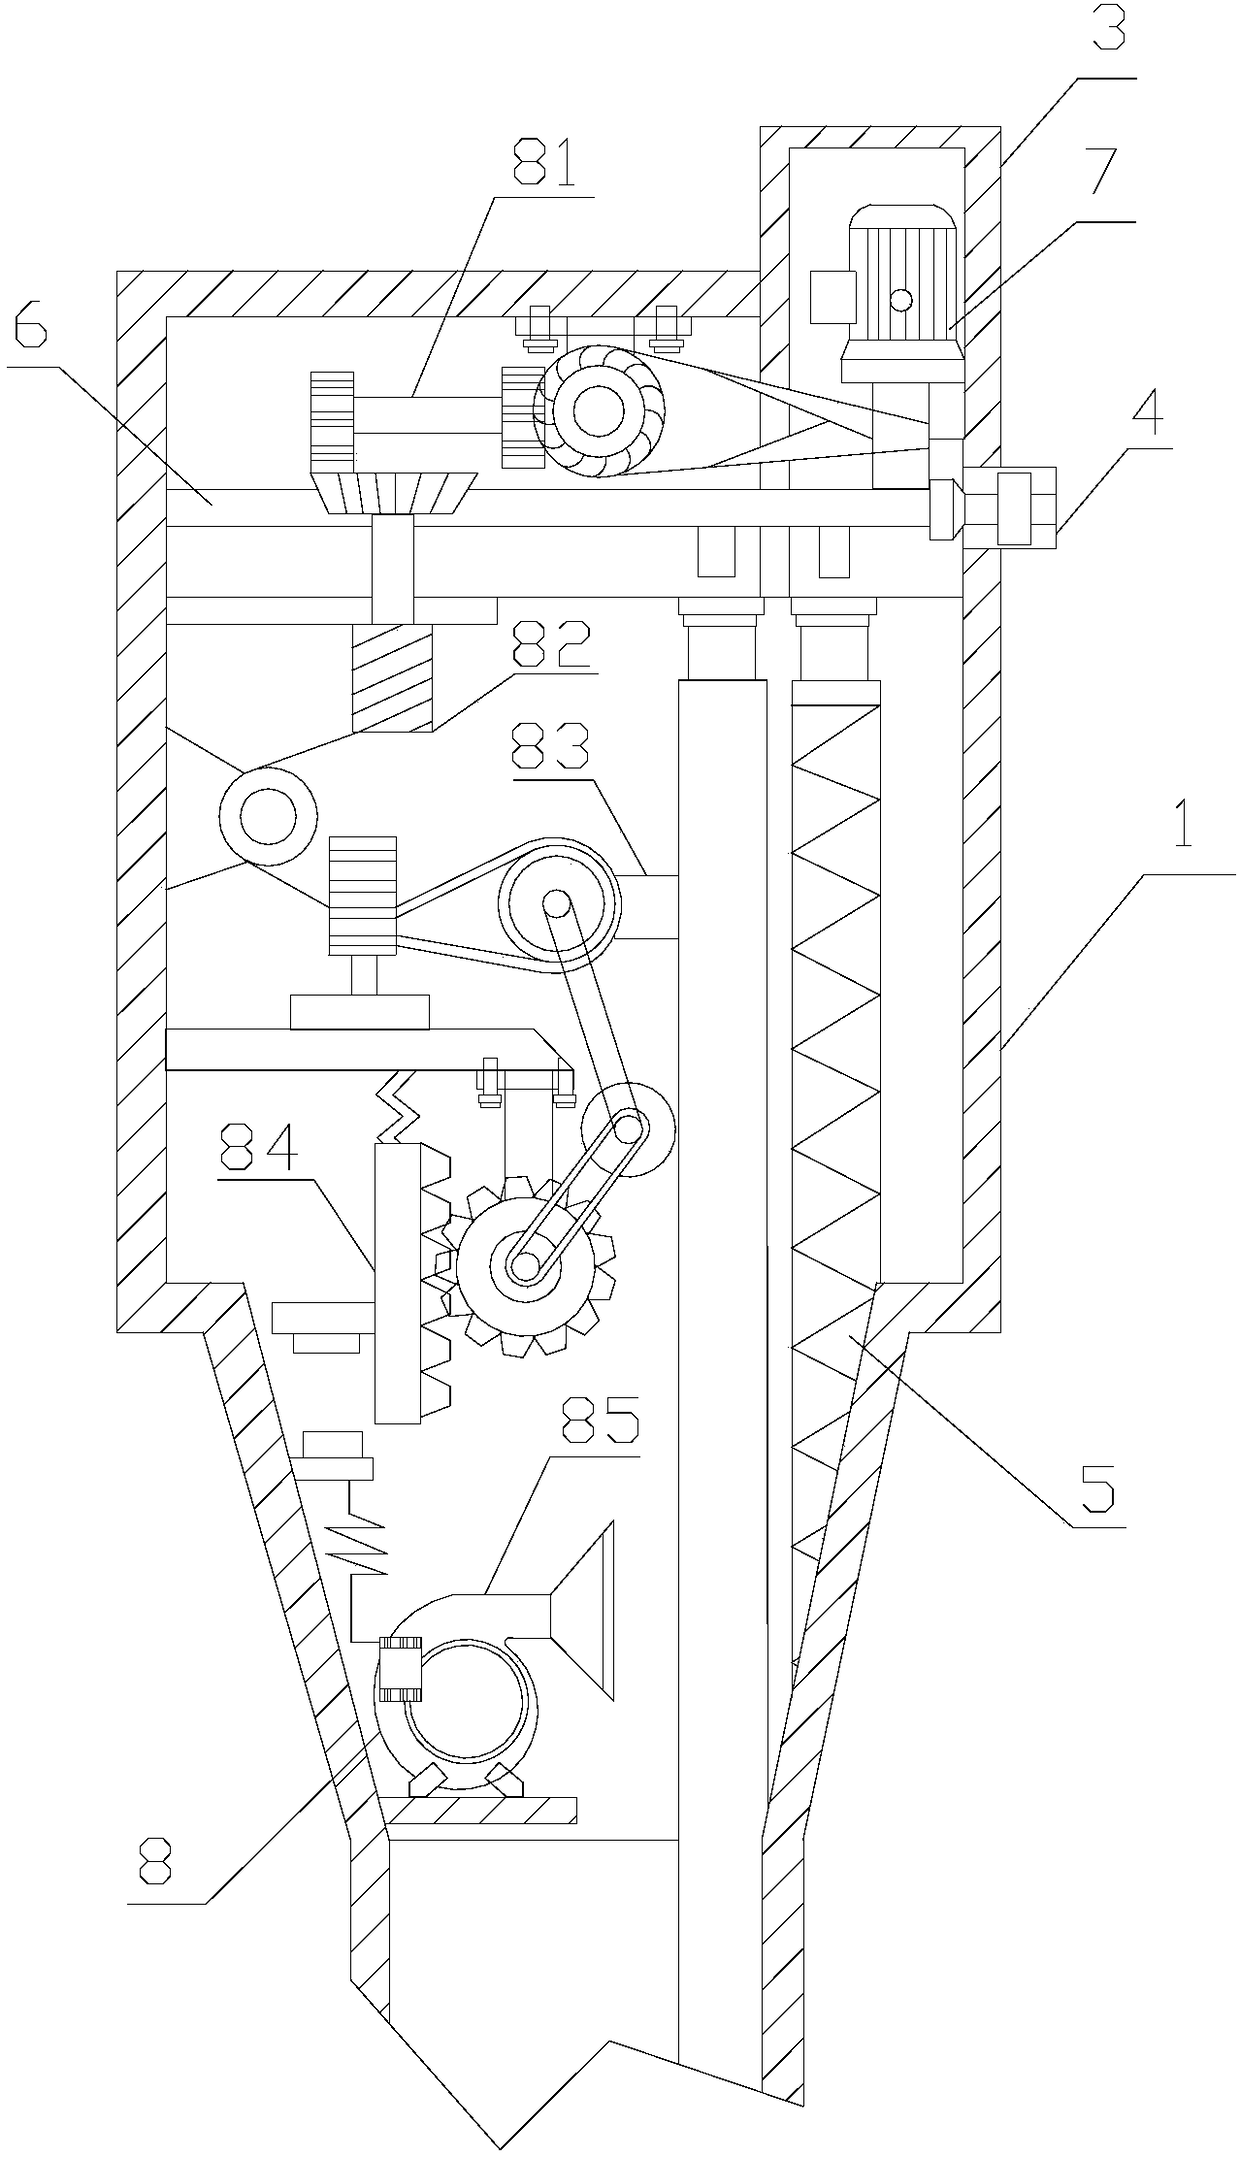 Novel dust removing device for wood processing